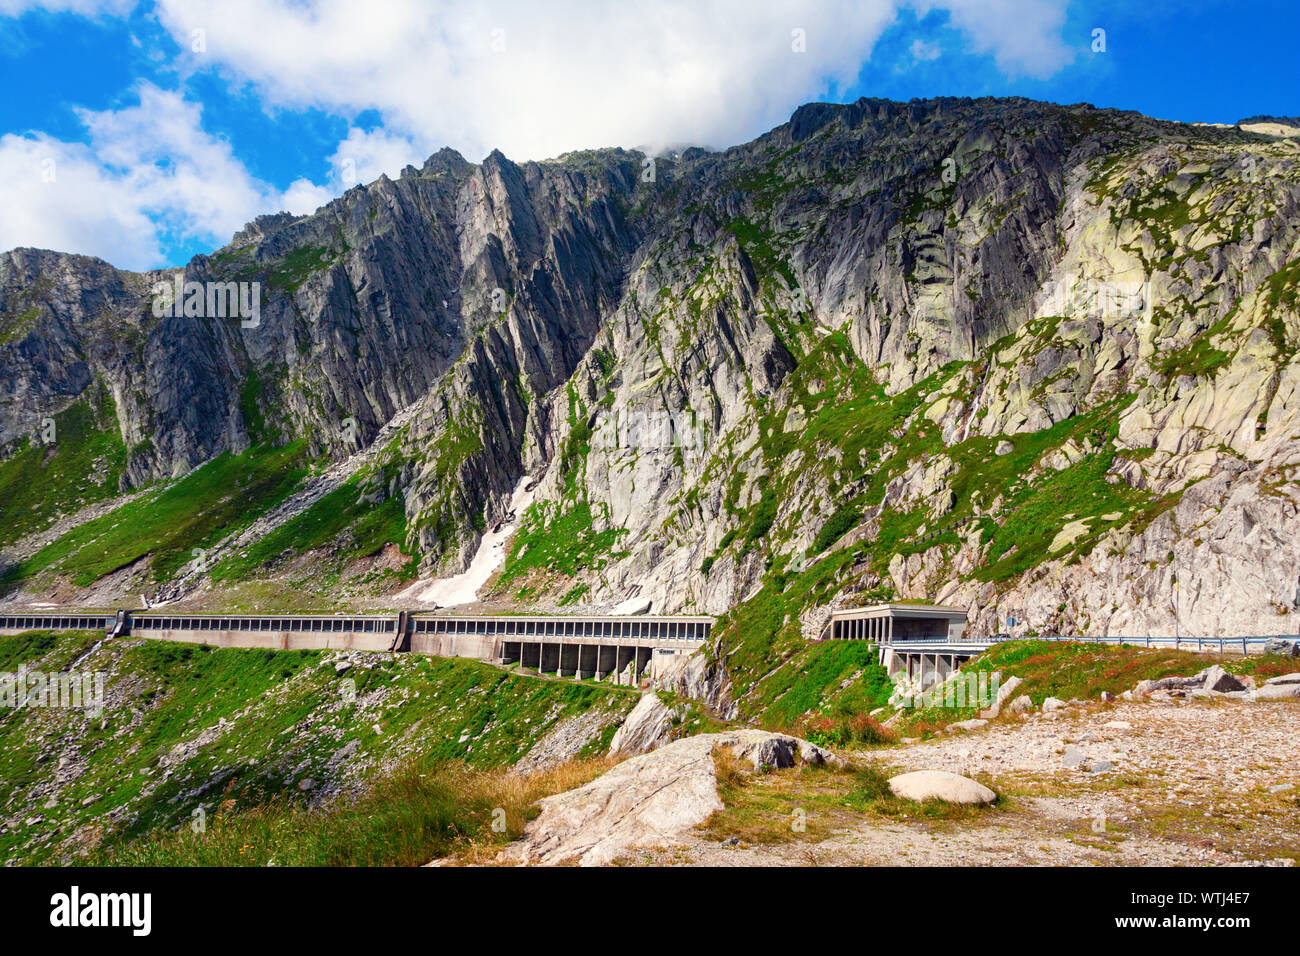 Gotthard Pass with National Road 2 running along steep cliffs of the Alps, protected with a concrete cover against falling rocks. Tessin, Switzerland. Stock Photo